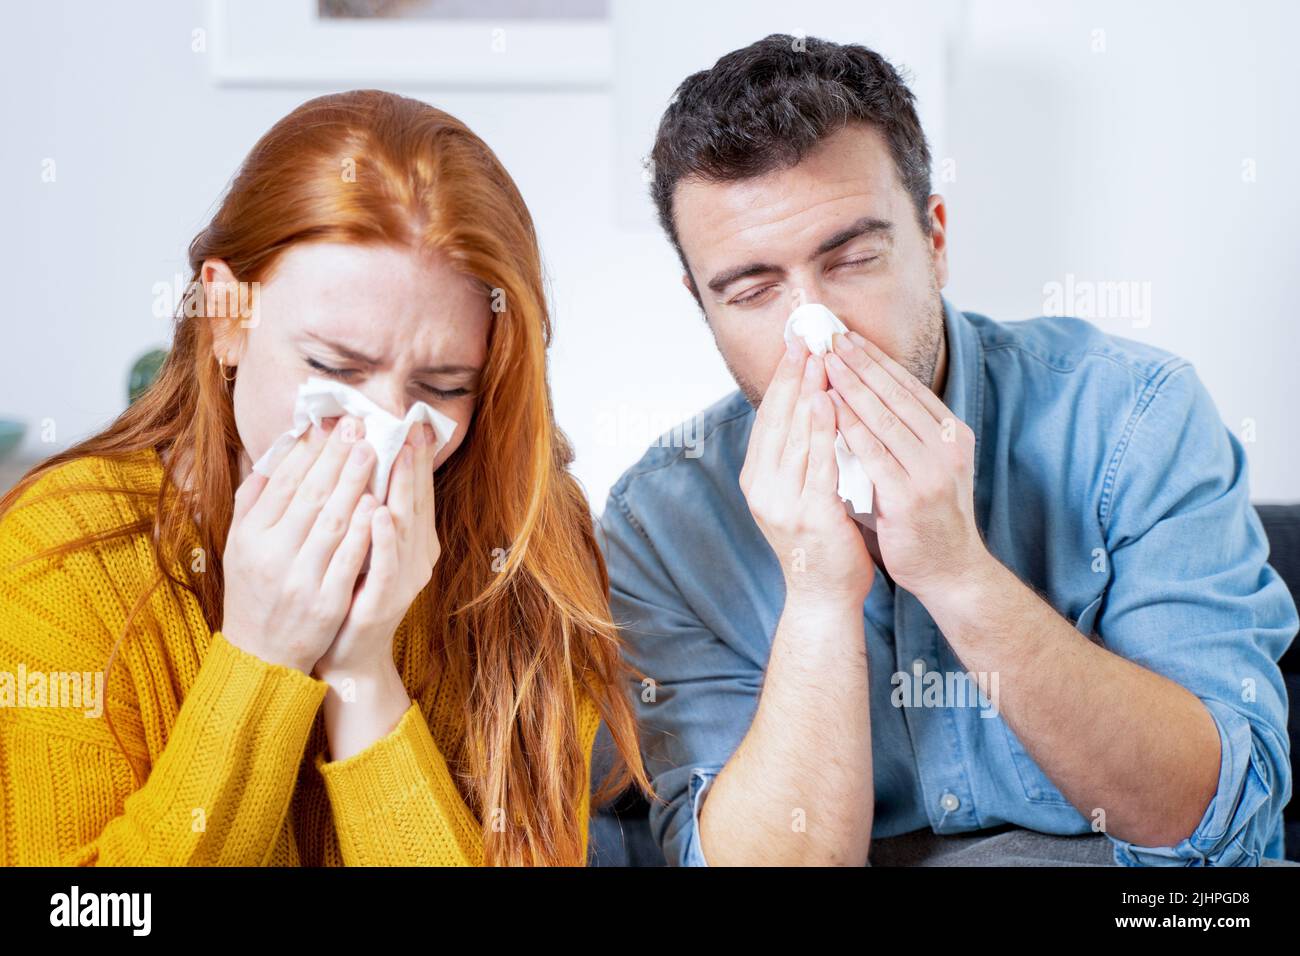 Sick couple blowing nose suffering flu symptoms together Stock Photo